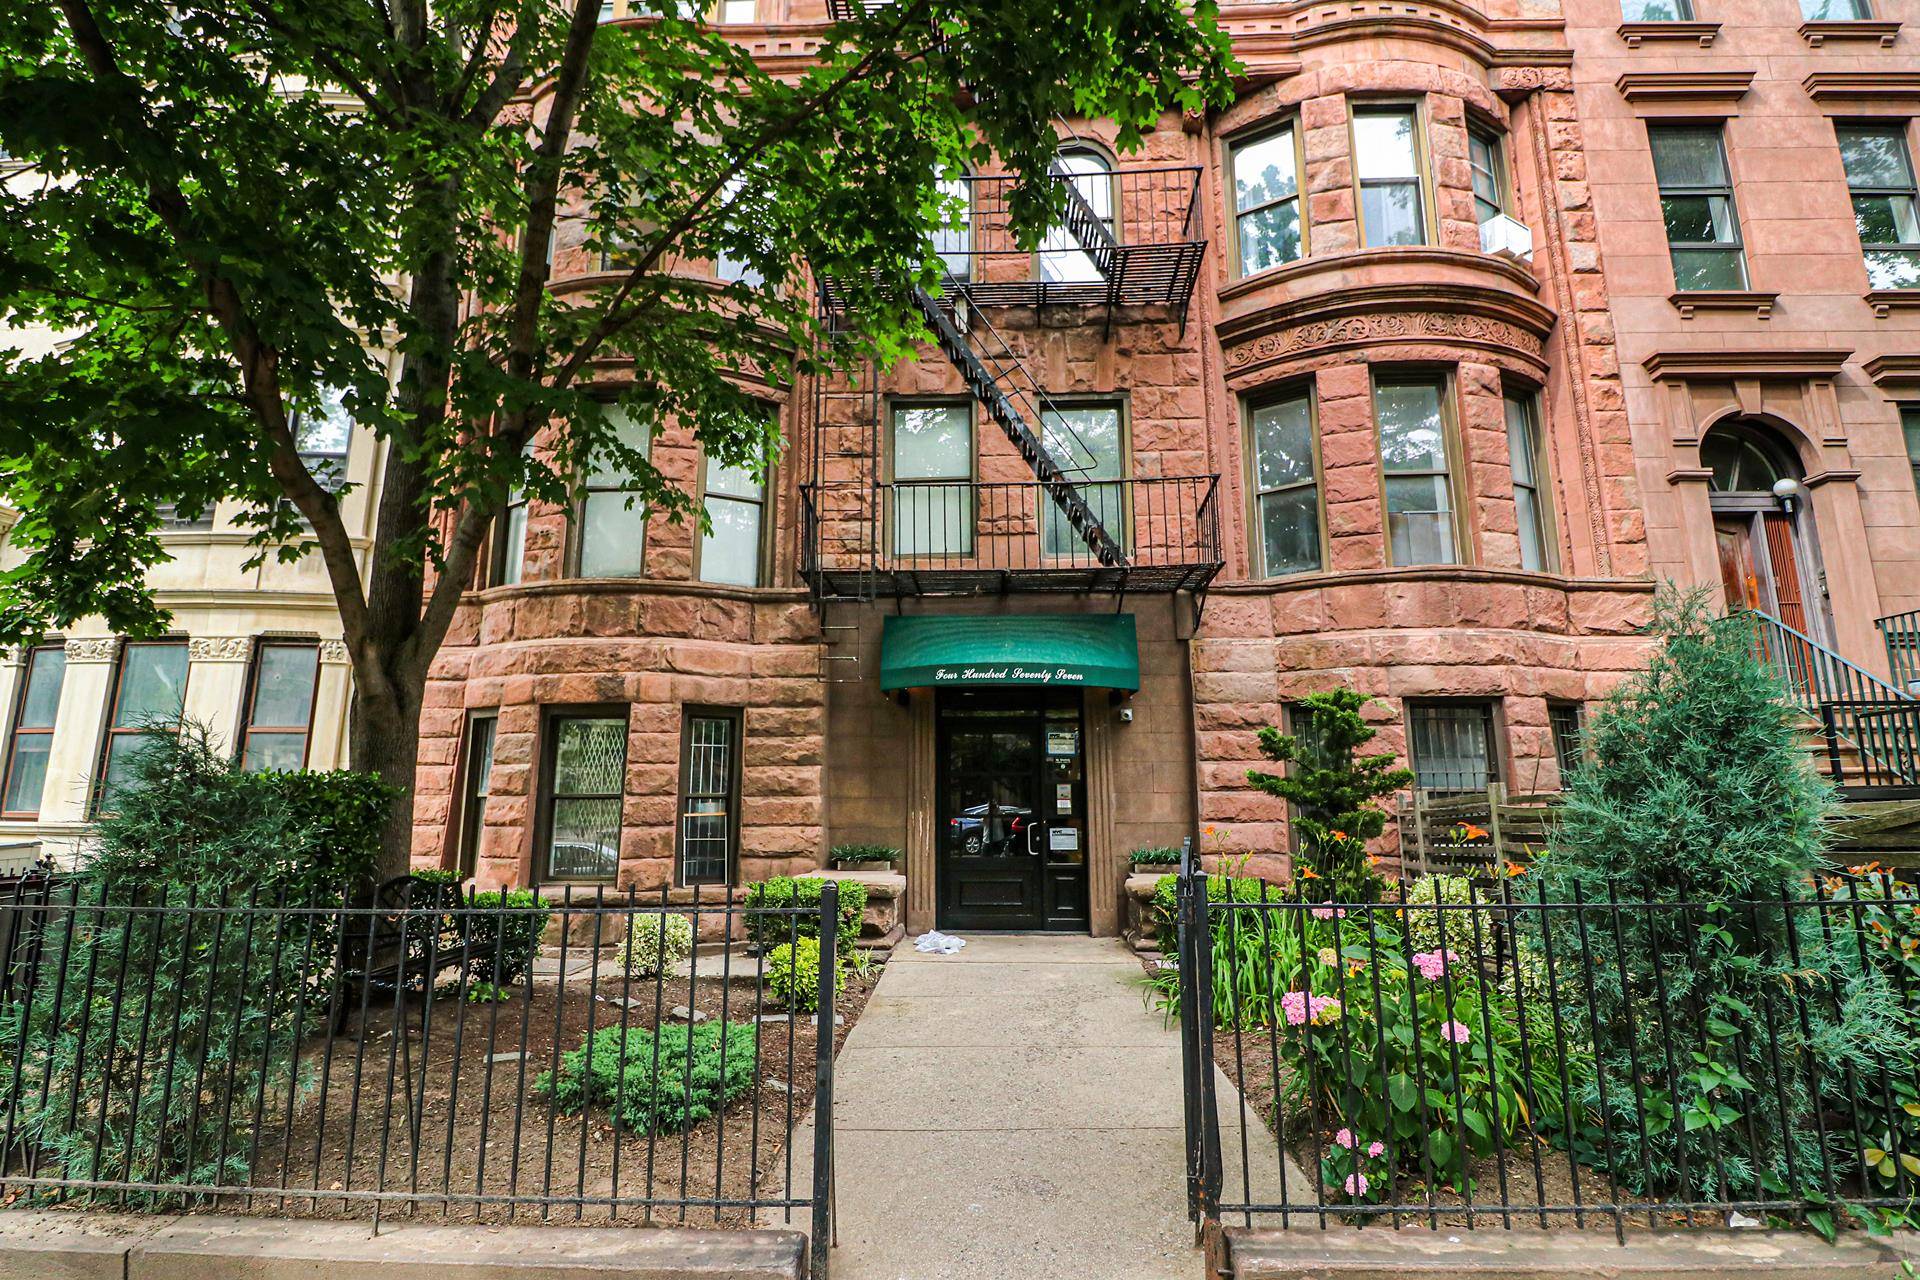 No Broker Fee ! Situated in a beautiful brownstone walk up get ready to call this renovated 1 bedroom with storage loft in Park Slope your new perfect home !